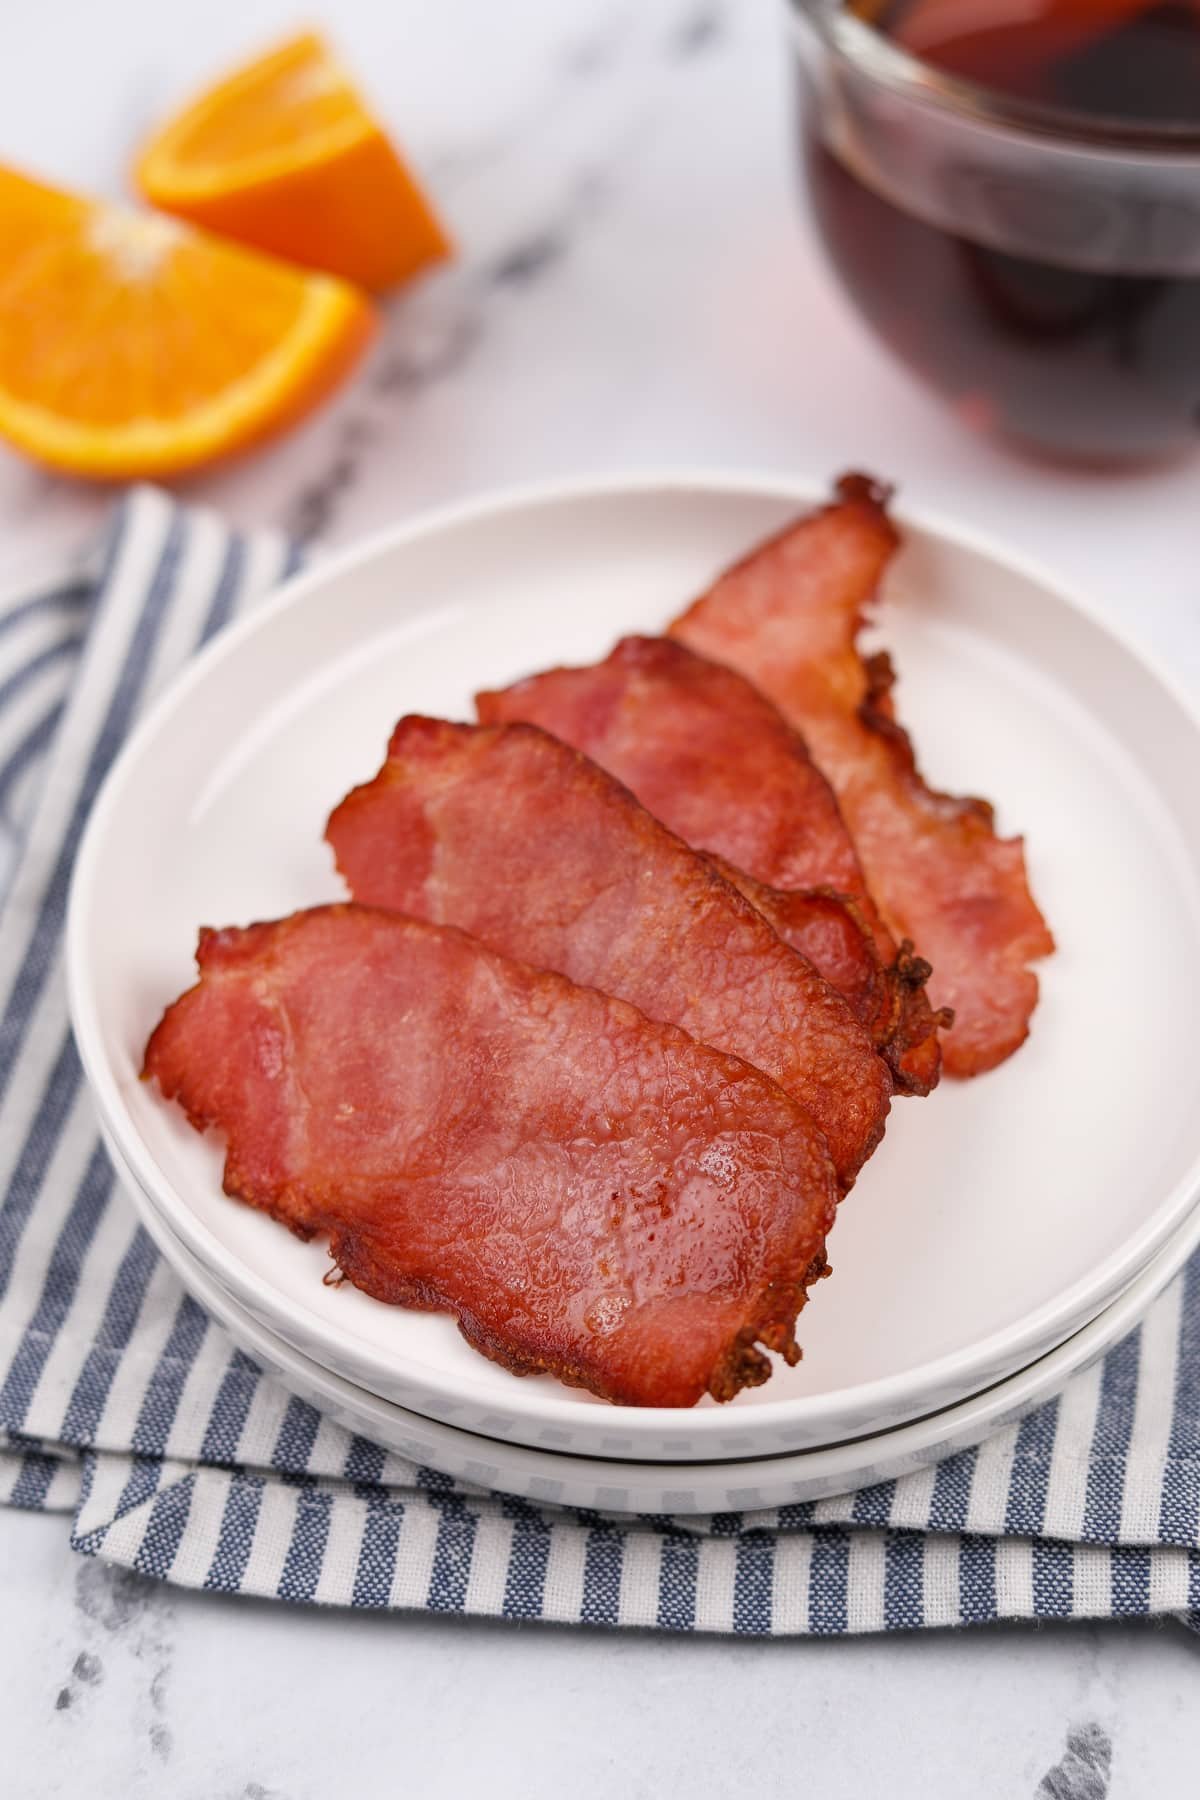 A plate resting on a striped napkin with four slices of Canadian bacon.